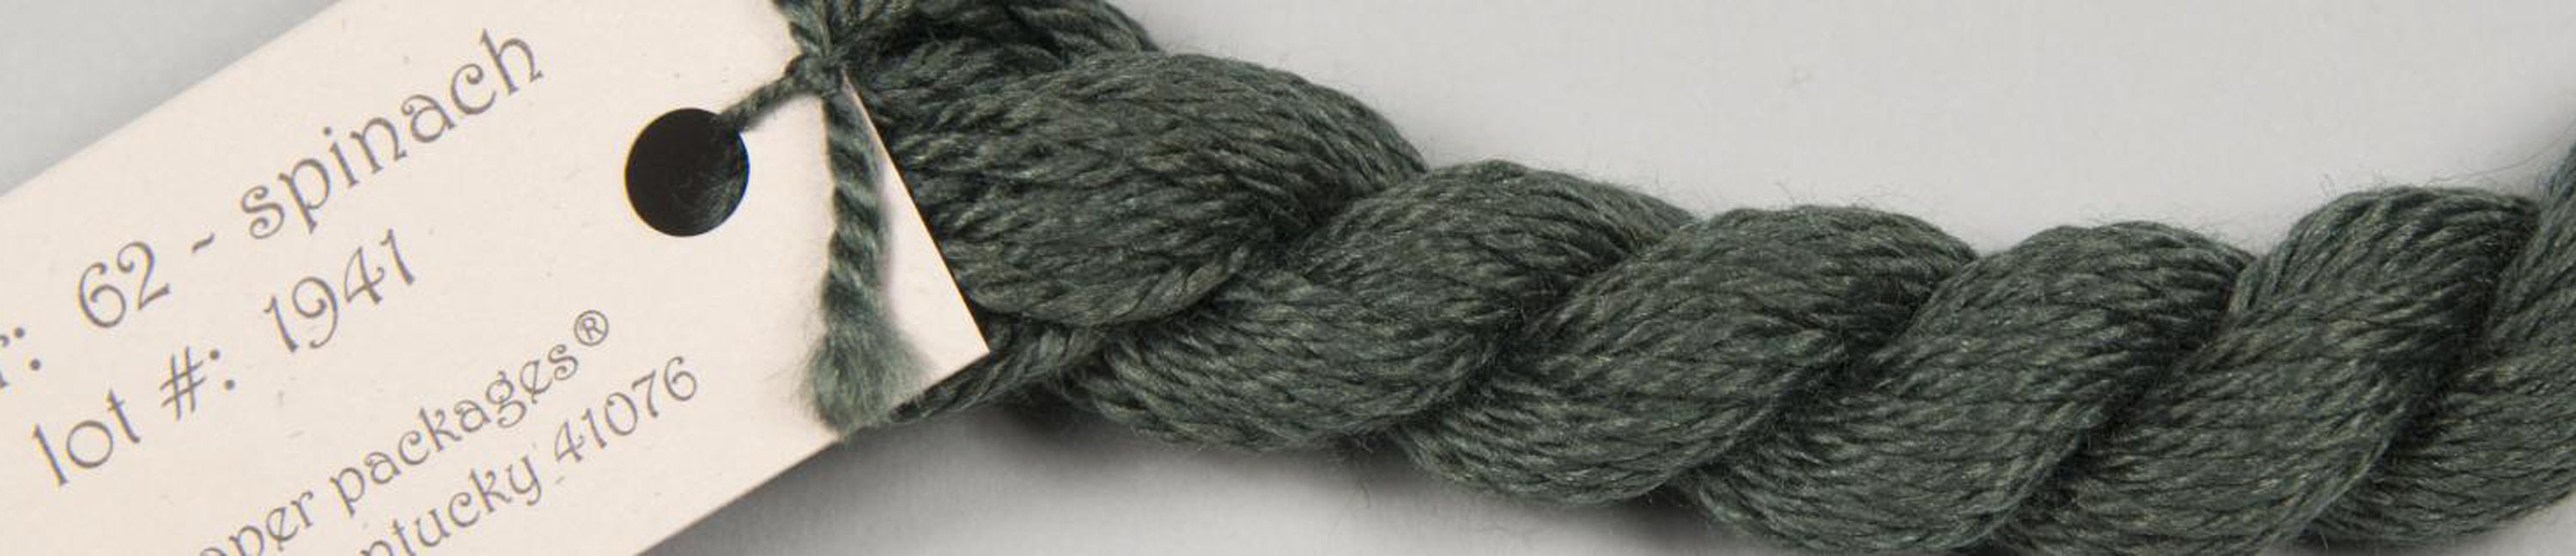 Silk & IVORY-SPINACH-62-1 SKEINS with This Listing 